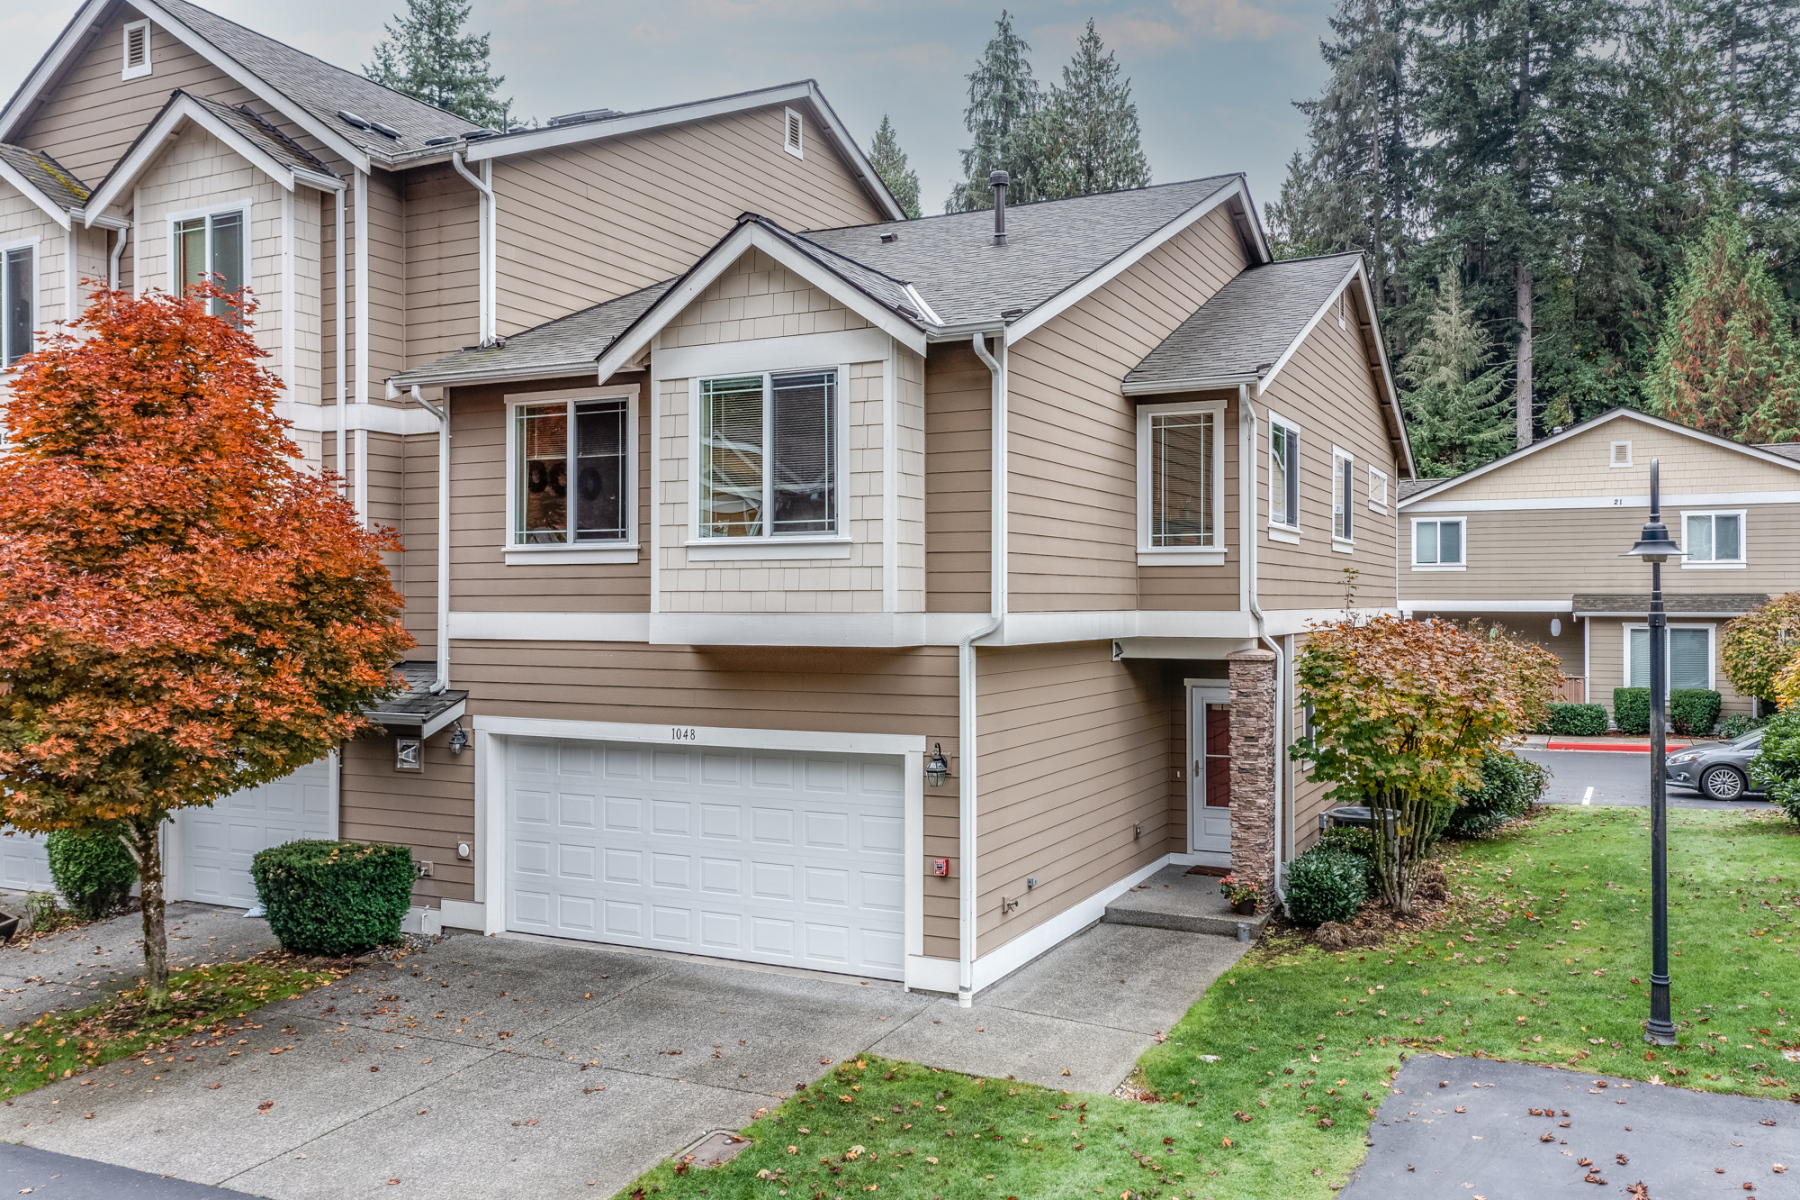 1048-215th-Pl-SE-Bothell-2